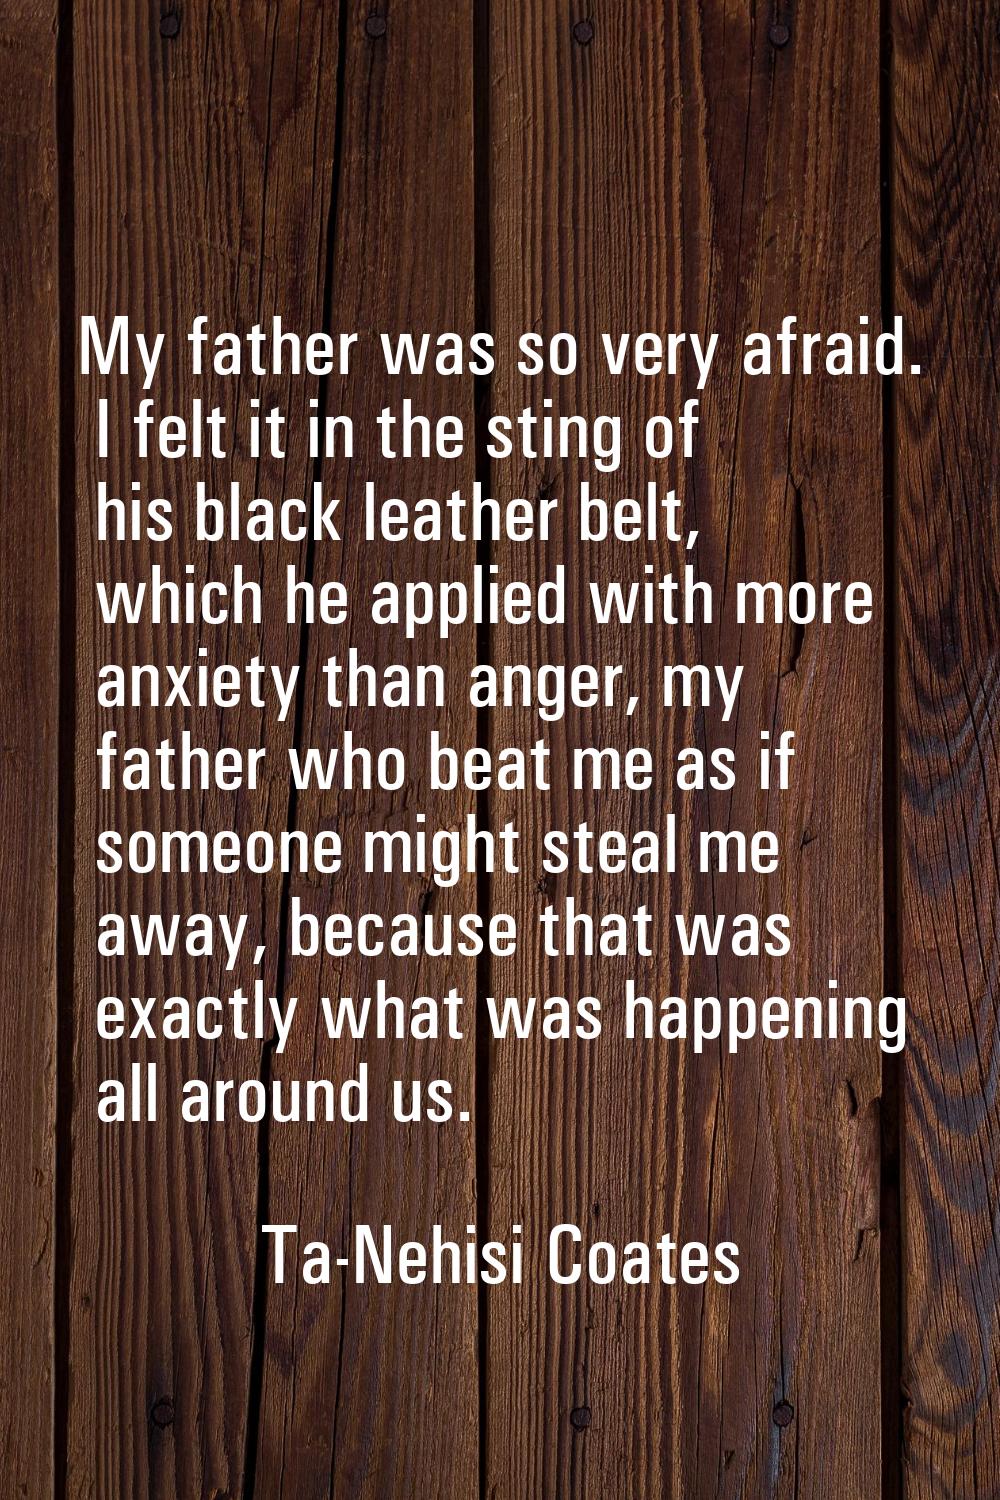 My father was so very afraid. I felt it in the sting of his black leather belt, which he applied wi